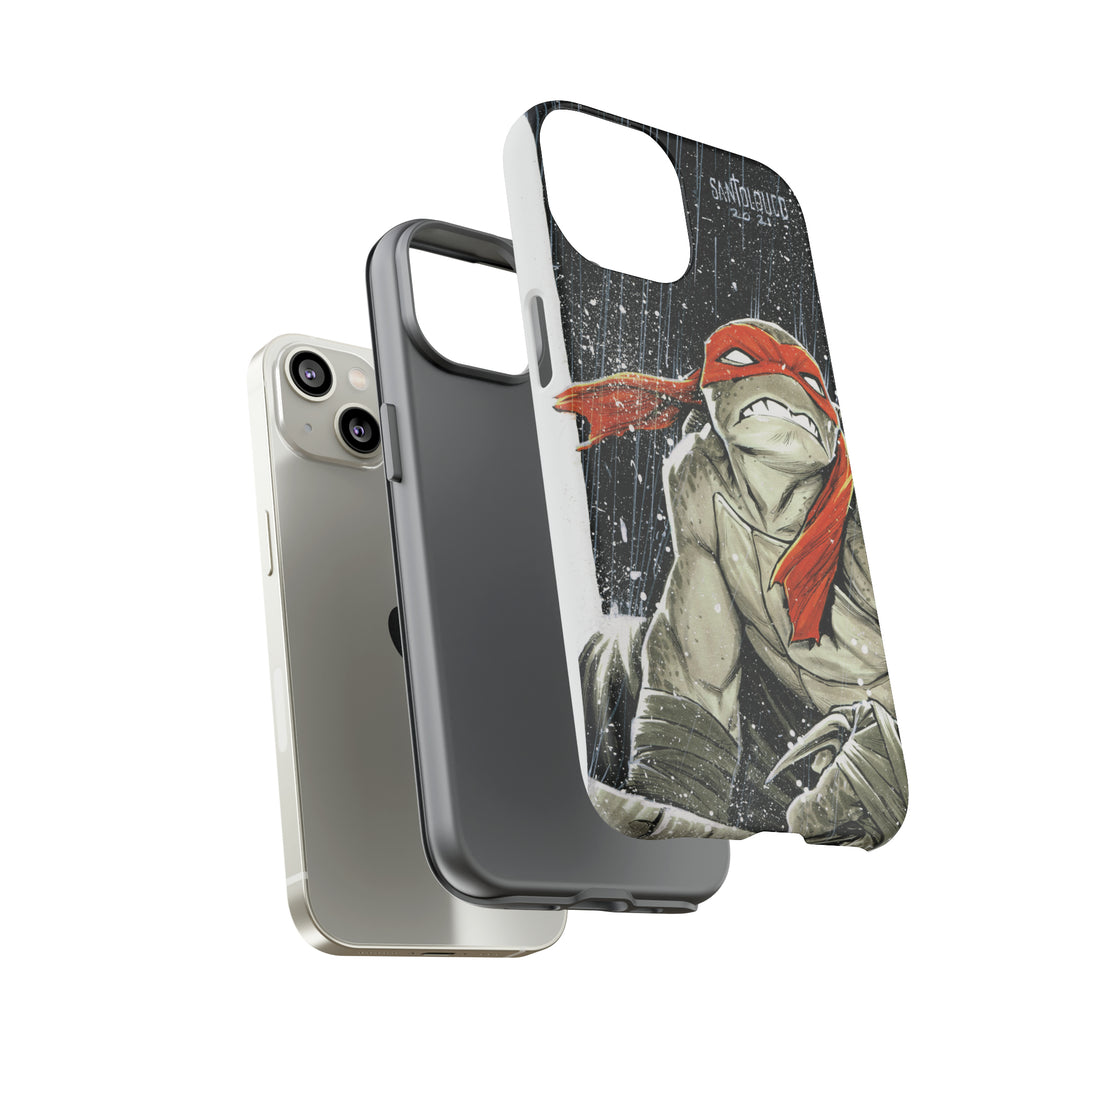 iPhone Premium-Quality Tough Cases: Raph Ready To Kick Some A$$